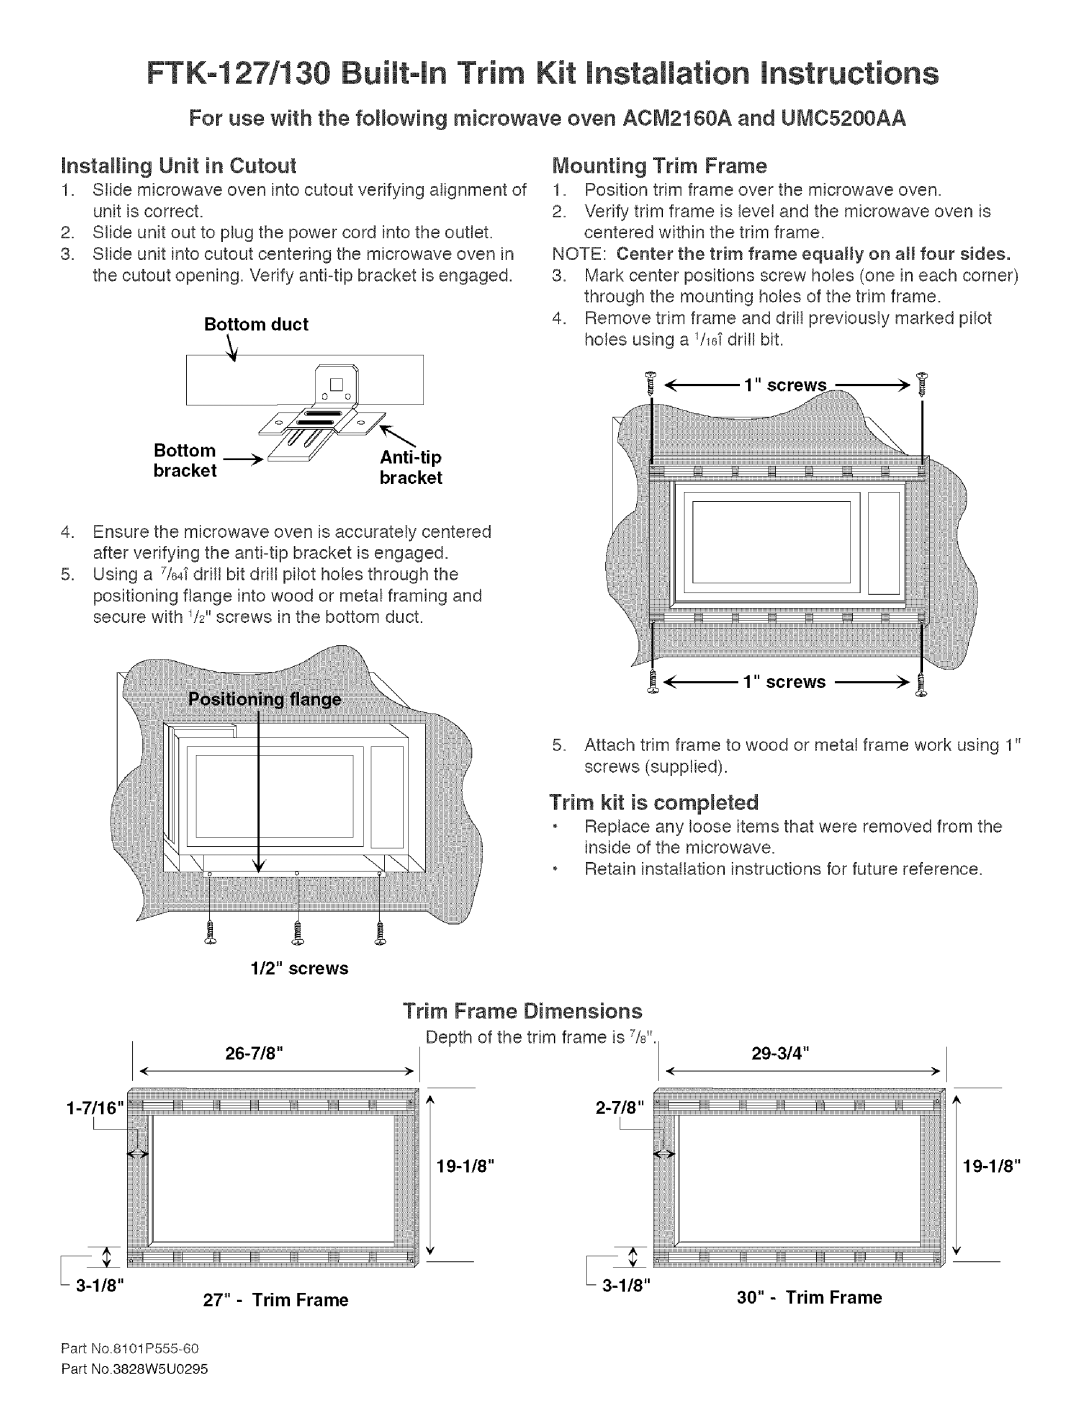 Sears FTK-130, FTK-127 dimensions hstaHing Unit in Cutout, Mounting Trim Frame, Trim kit is completed, Dimensions, Bottom 